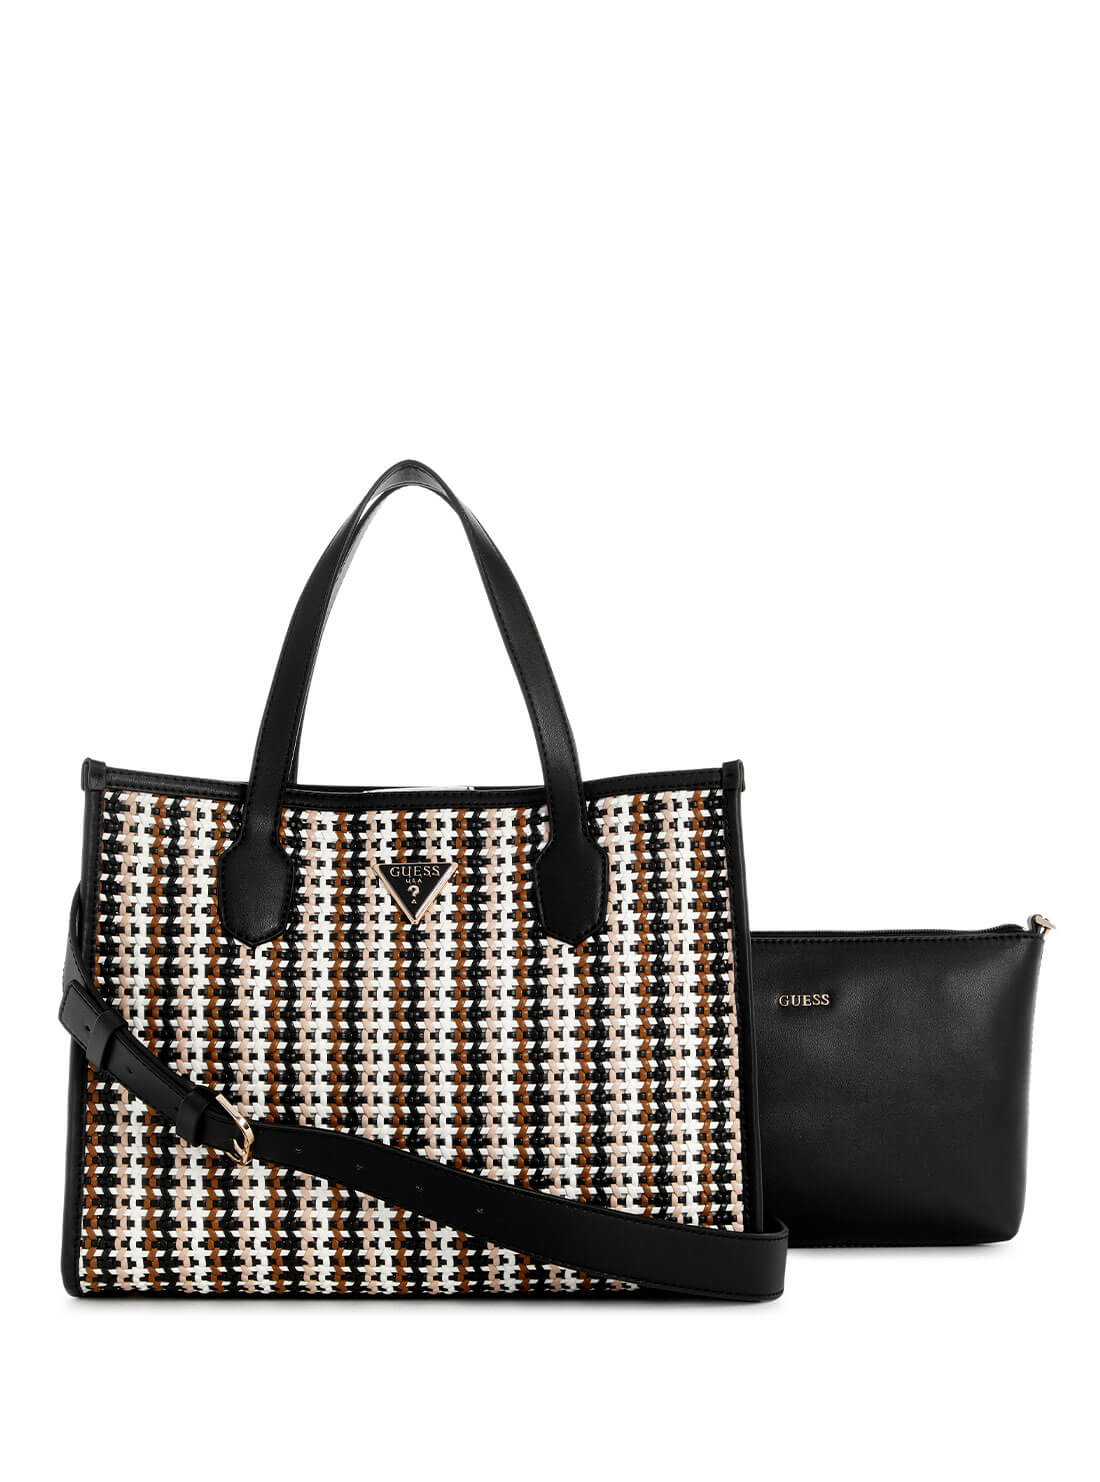 GUESS Black Multi Woven Silvana Tote Bag front view